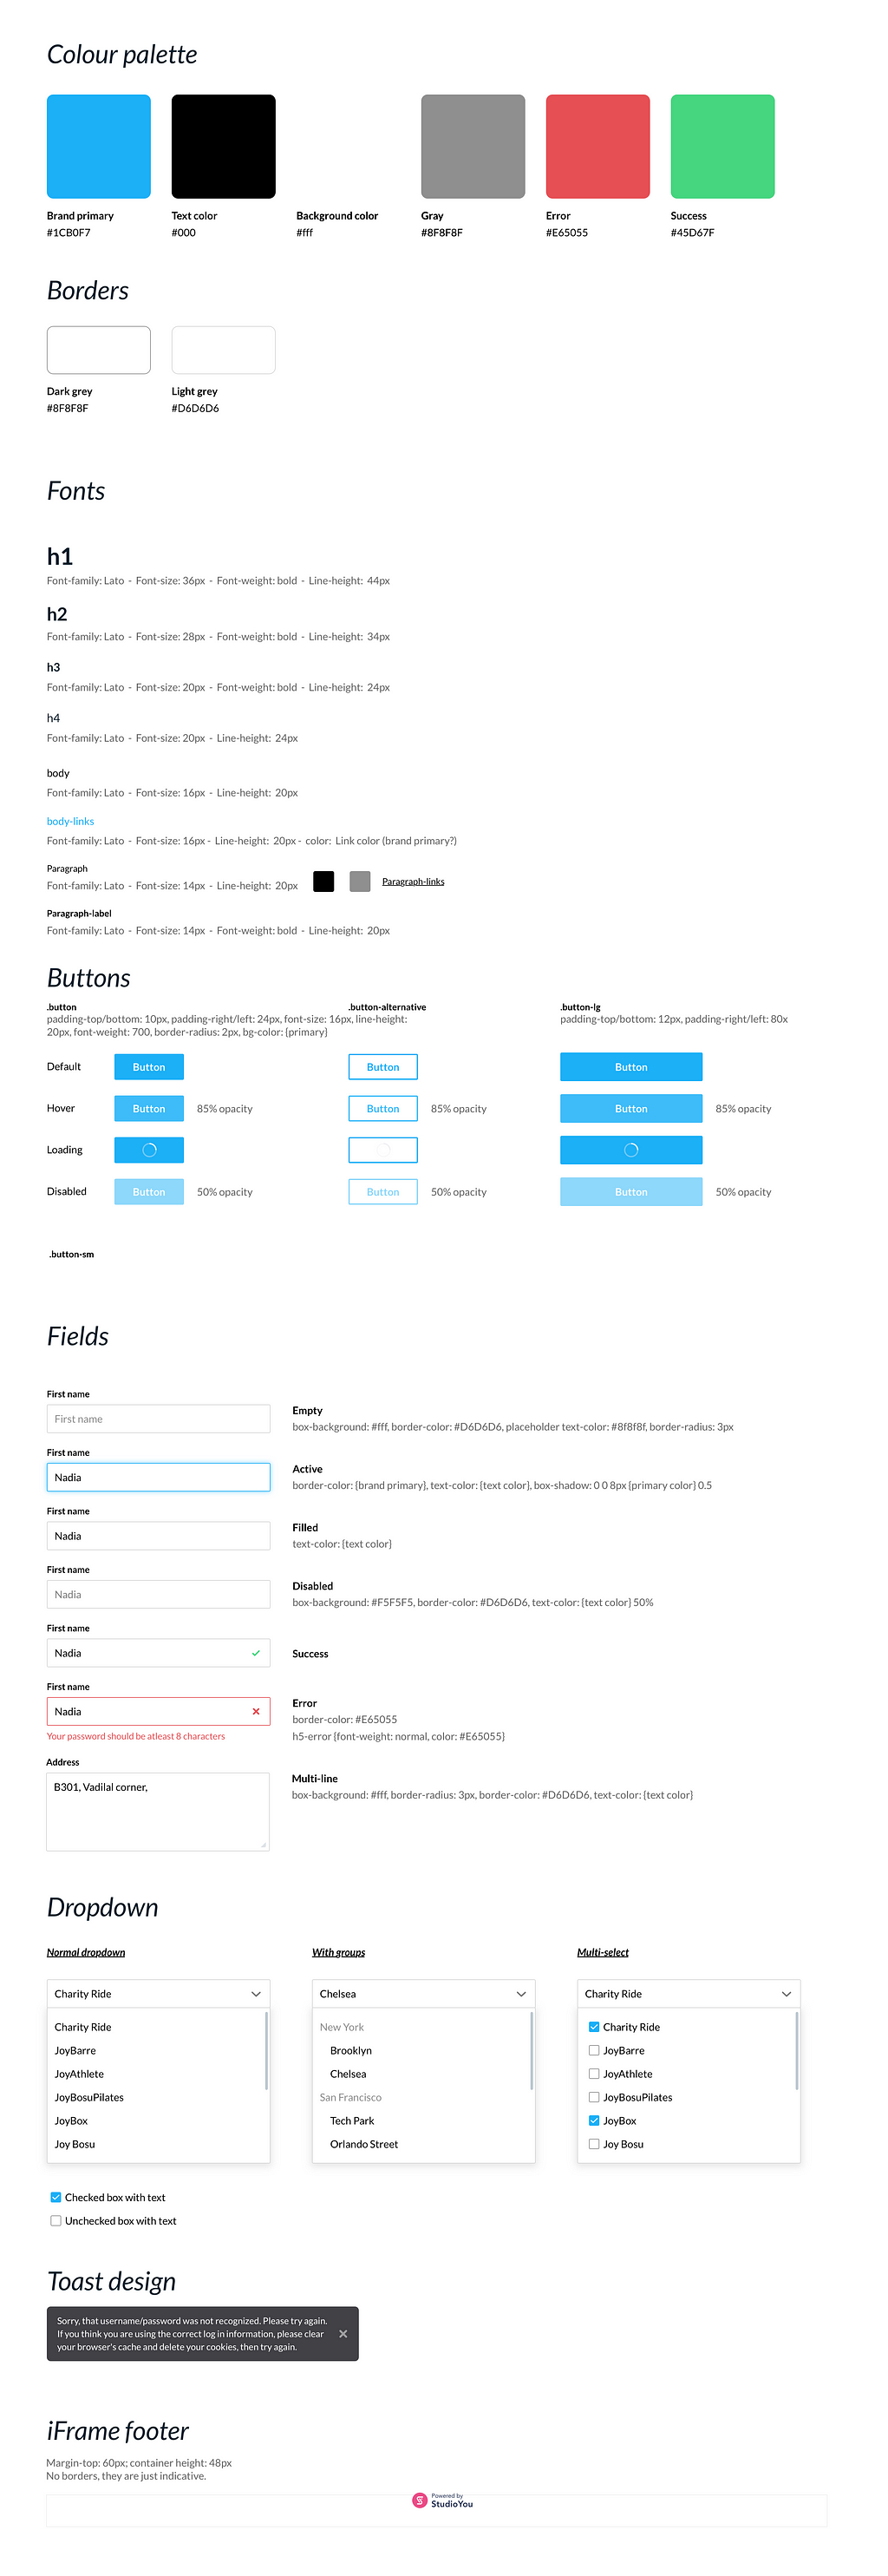 A screenshot of a simple style guideline for a product. Comprise color palette, border,buttons, form parts, fonts, toast, etc